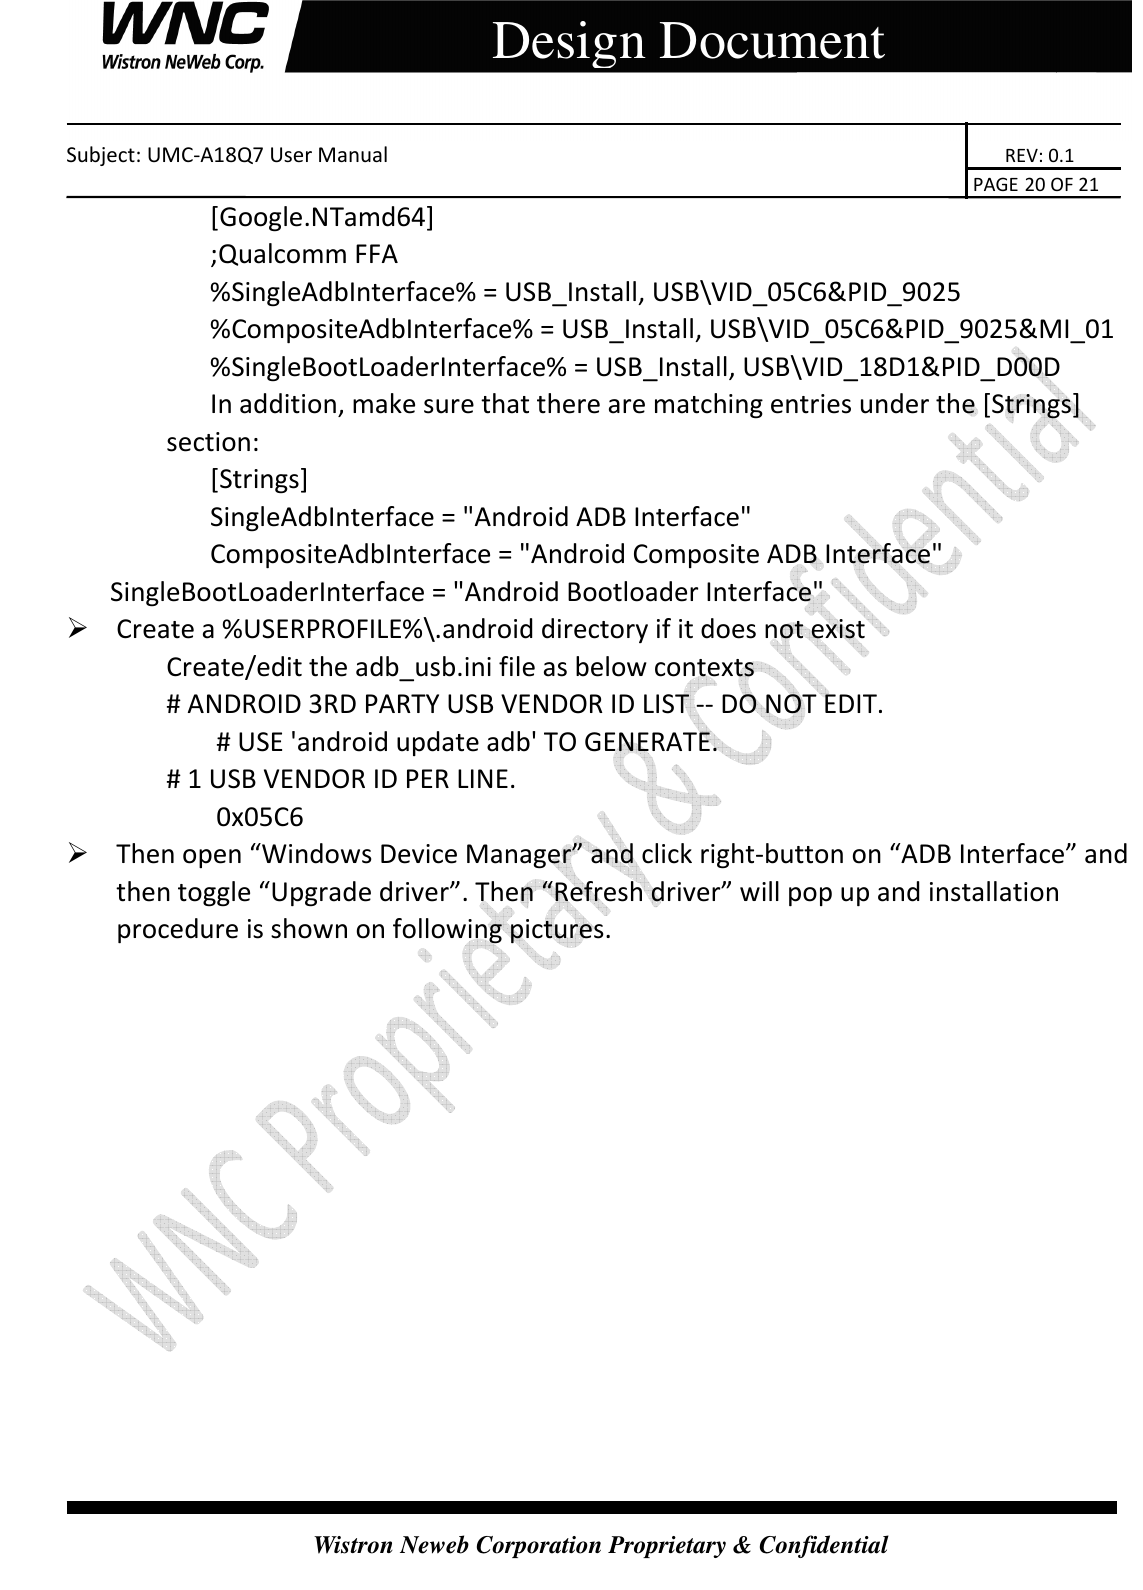    Subject: UMC-A18Q7 User Manual                                                                       REV: 0.1                                                                                                                                                                               PAGE 20 OF 21  Wistron Neweb Corporation Proprietary &amp; Confidential     Design Document [Google.NTamd64]   ;Qualcomm FFA   %SingleAdbInterface% = USB_Install, USB\VID_05C6&amp;PID_9025   %CompositeAdbInterface% = USB_Install, USB\VID_05C6&amp;PID_9025&amp;MI_01   %SingleBootLoaderInterface% = USB_Install, USB\VID_18D1&amp;PID_D00D   In addition, make sure that there are matching entries under the [Strings] section:   [Strings]   SingleAdbInterface = &quot;Android ADB Interface&quot;   CompositeAdbInterface = &quot;Android Composite ADB Interface&quot;   SingleBootLoaderInterface = &quot;Android Bootloader Interface&quot;  Create a %USERPROFILE%\.android directory if it does not exist Create/edit the adb_usb.ini file as below contexts # ANDROID 3RD PARTY USB VENDOR ID LIST -- DO NOT EDIT.   # USE &apos;android update adb&apos; TO GENERATE.   # 1 USB VENDOR ID PER LINE.   0x05C6  Then open “Windows Device Manager” and click right-button on “ADB Interface” and then toggle “Upgrade driver”. Then “Refresh driver” will pop up and installation procedure is shown on following pictures. 